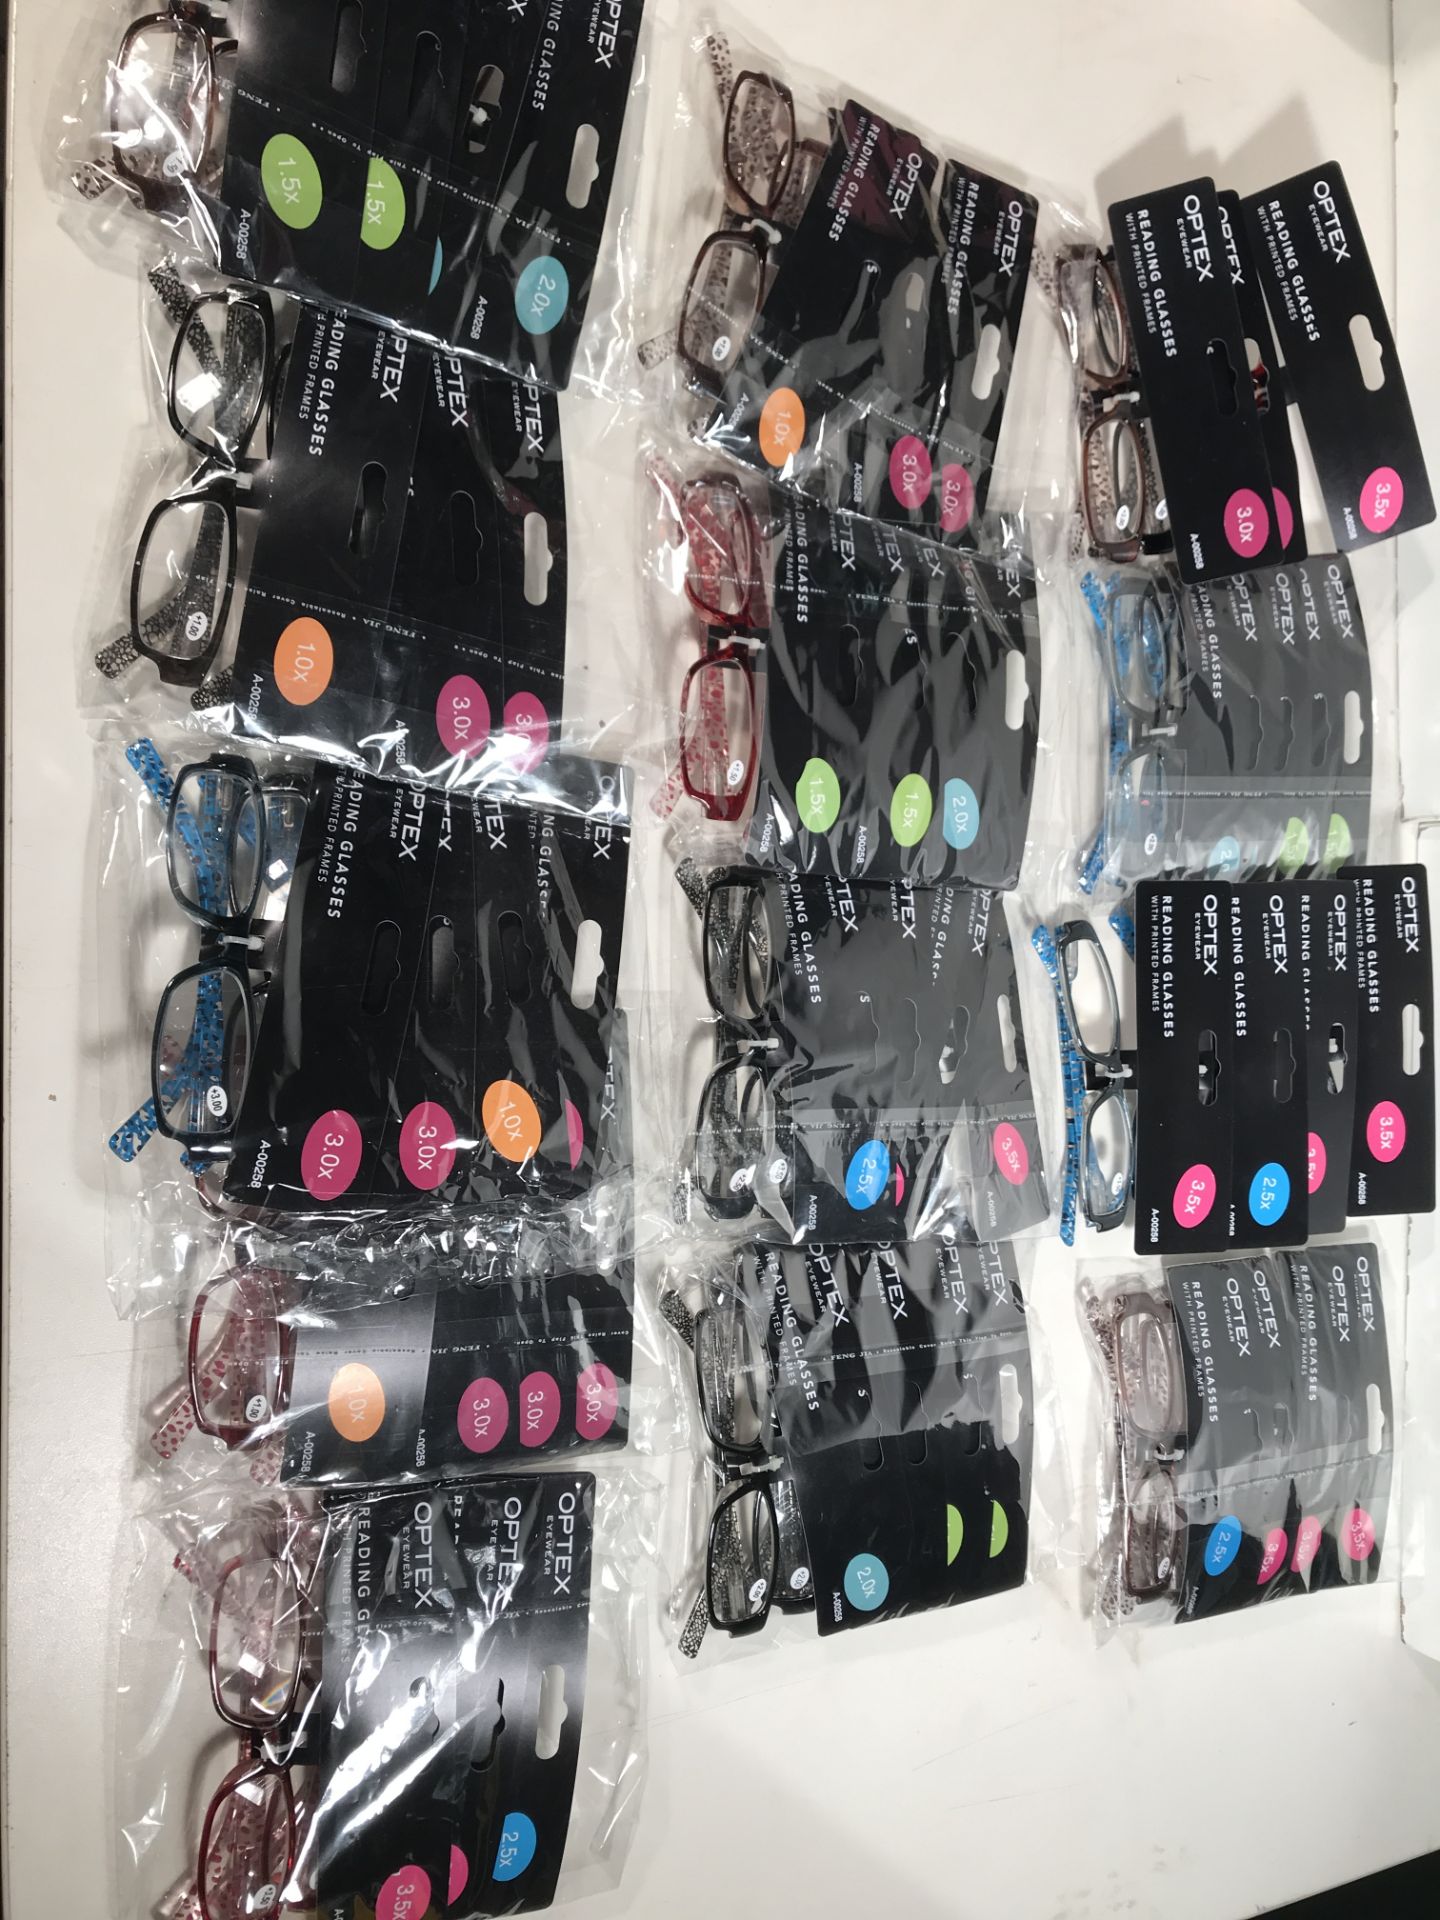 48 Pairs of Optex Reading Glasses